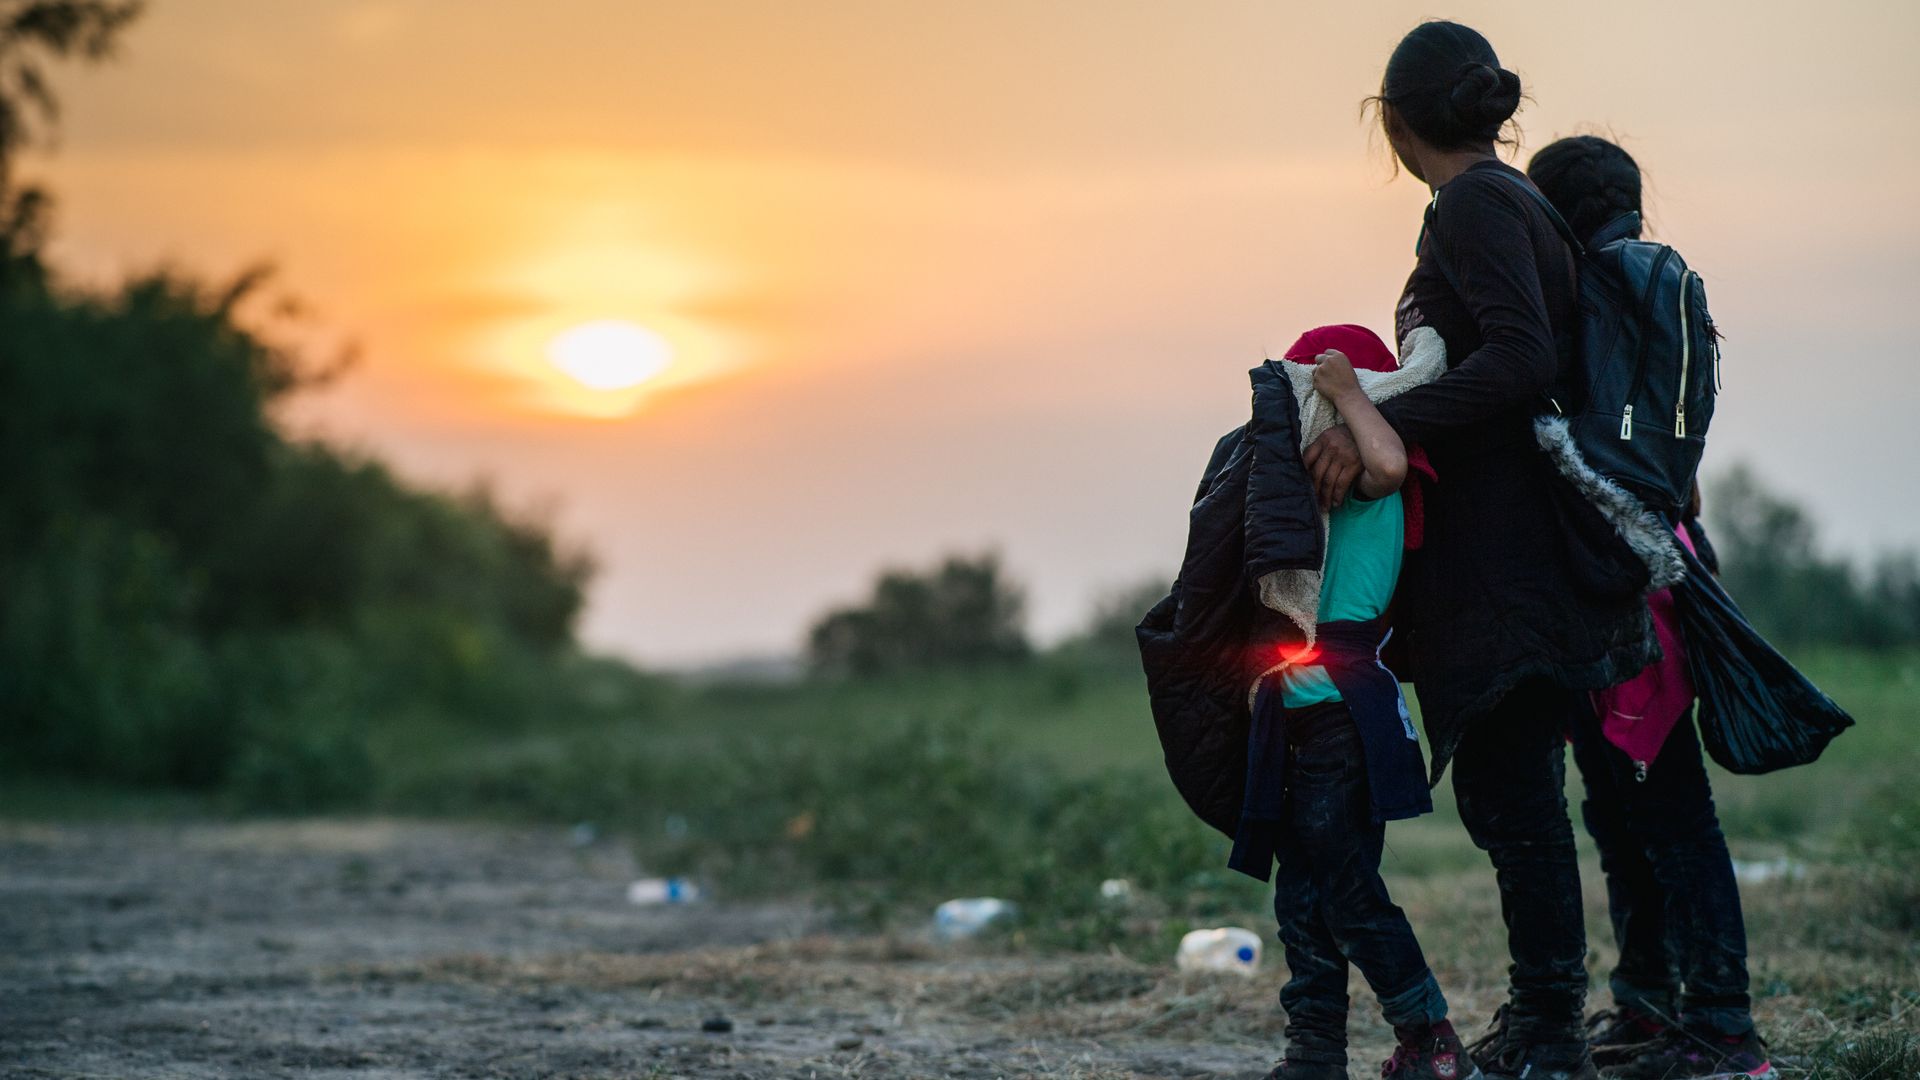 A migrant family is seen looking at the setting sun while awaiting processing after crossing the U.S.-Mexico border.